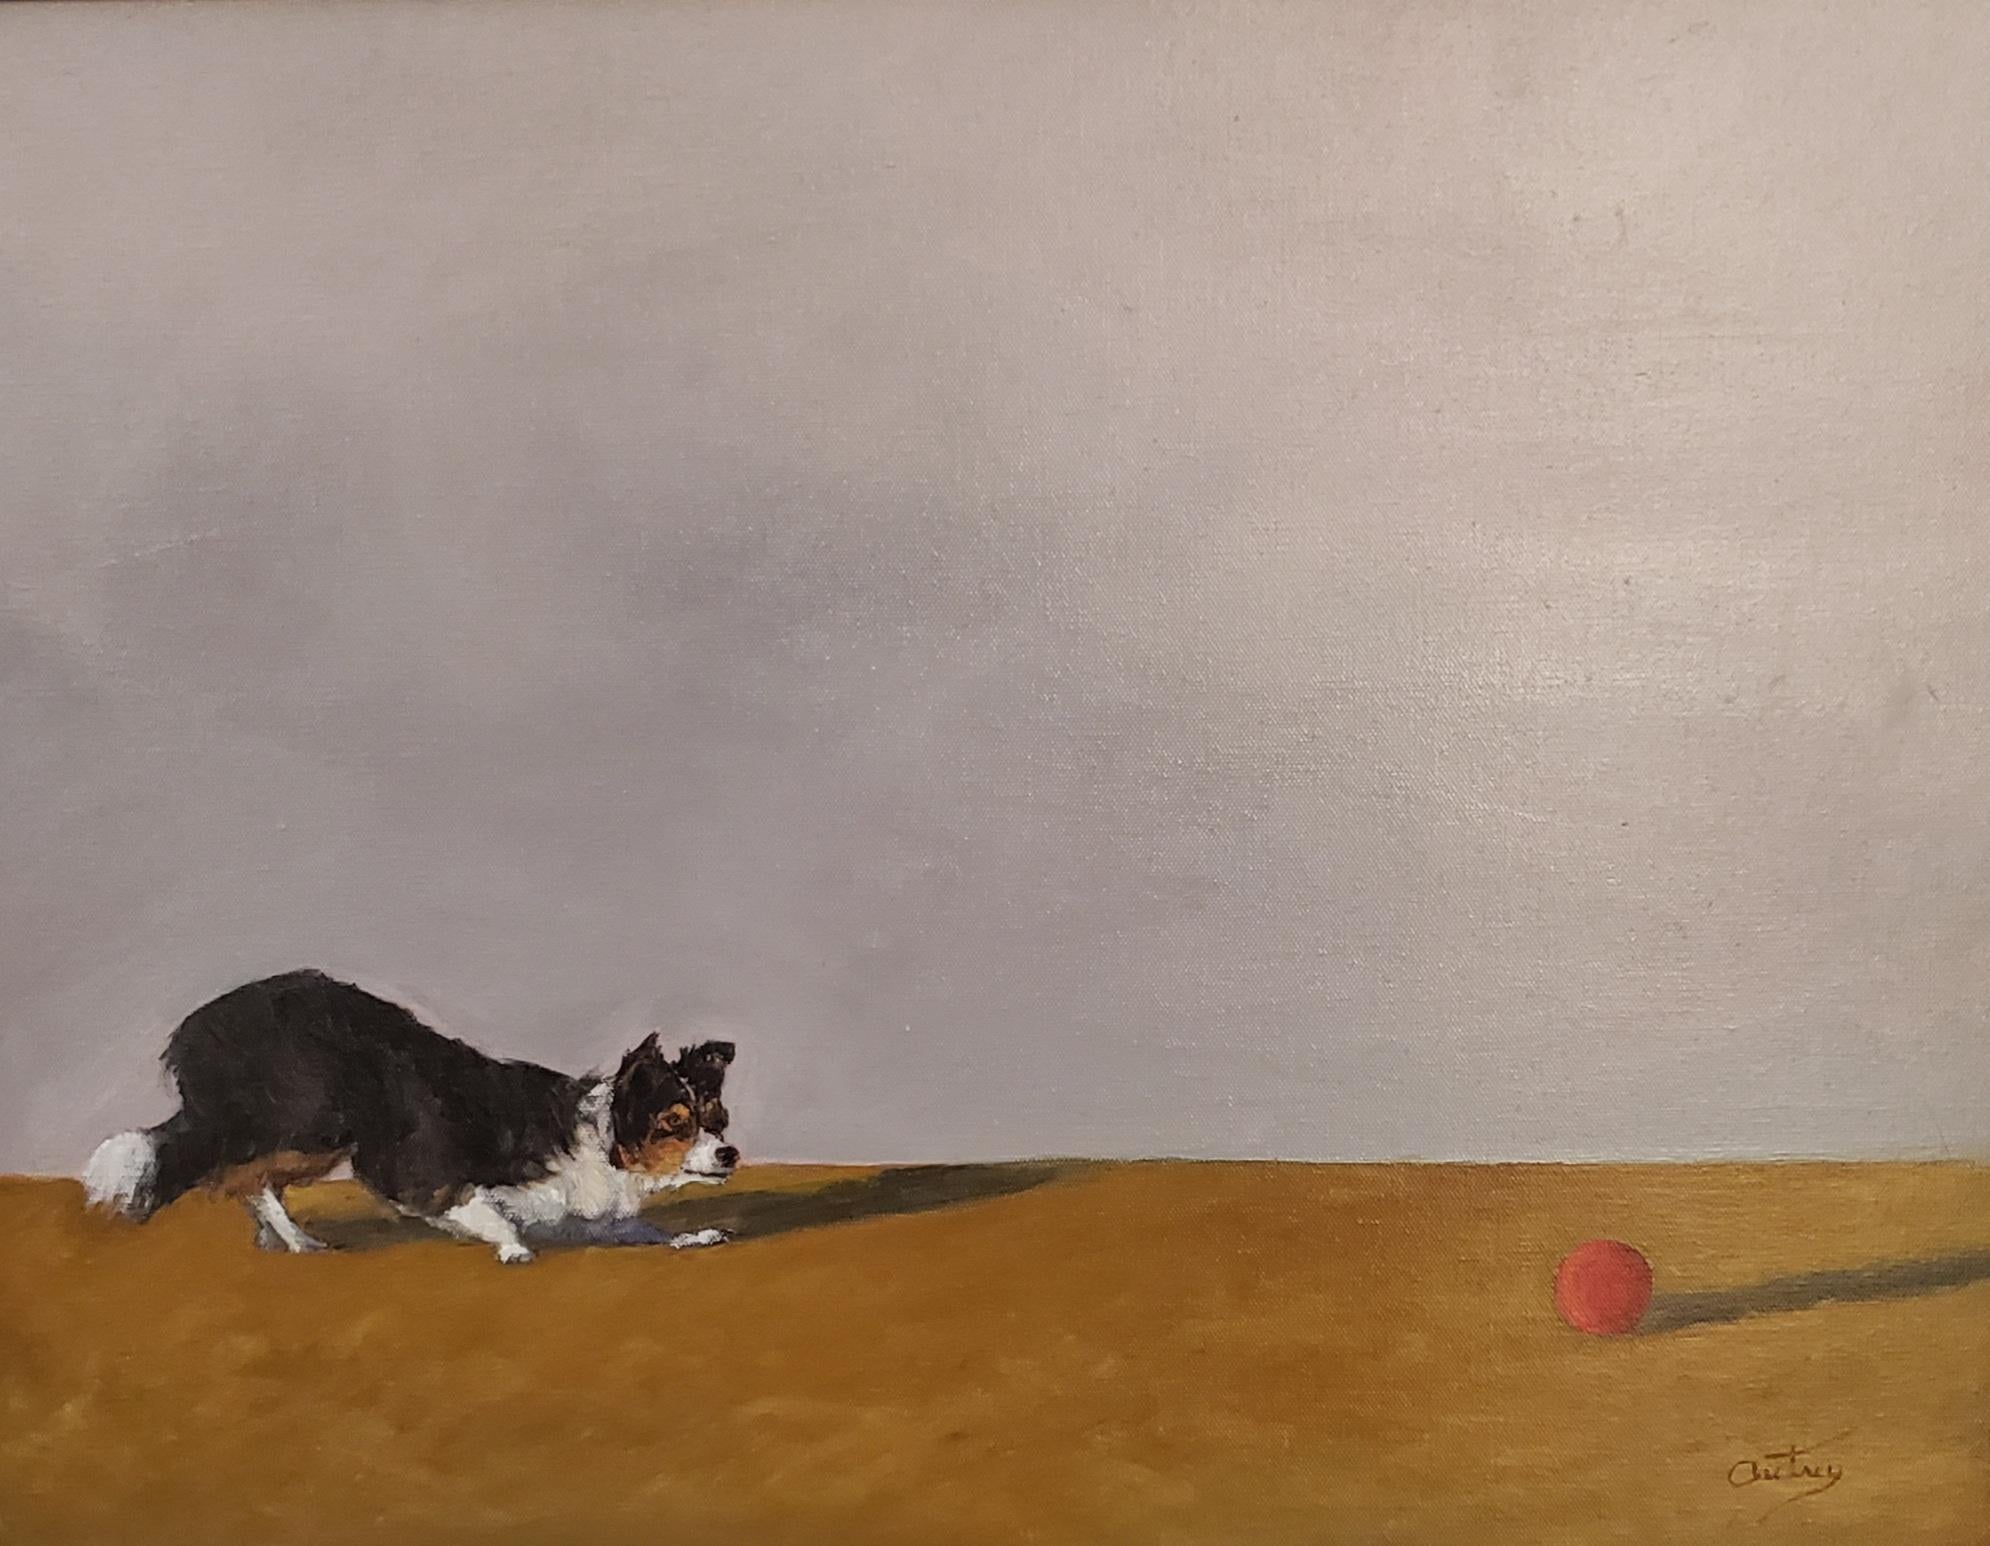 Luke Autrey Figurative Painting - The Red Ball, Texas Artist, Realist, Light and Shadow, Dog Painting, Realism